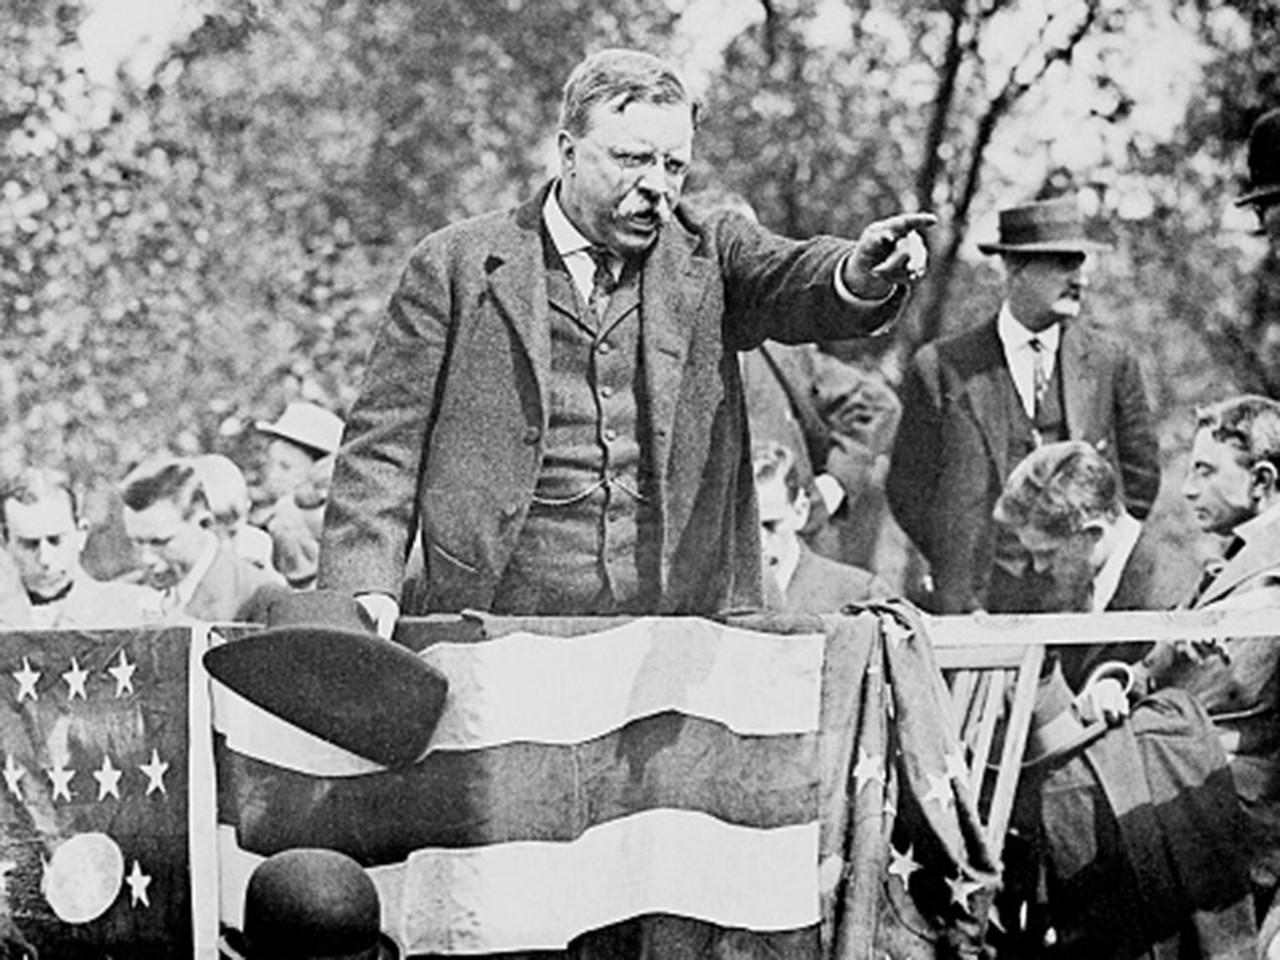 Theodore Roosevelt addressing a campaign rally before he became president